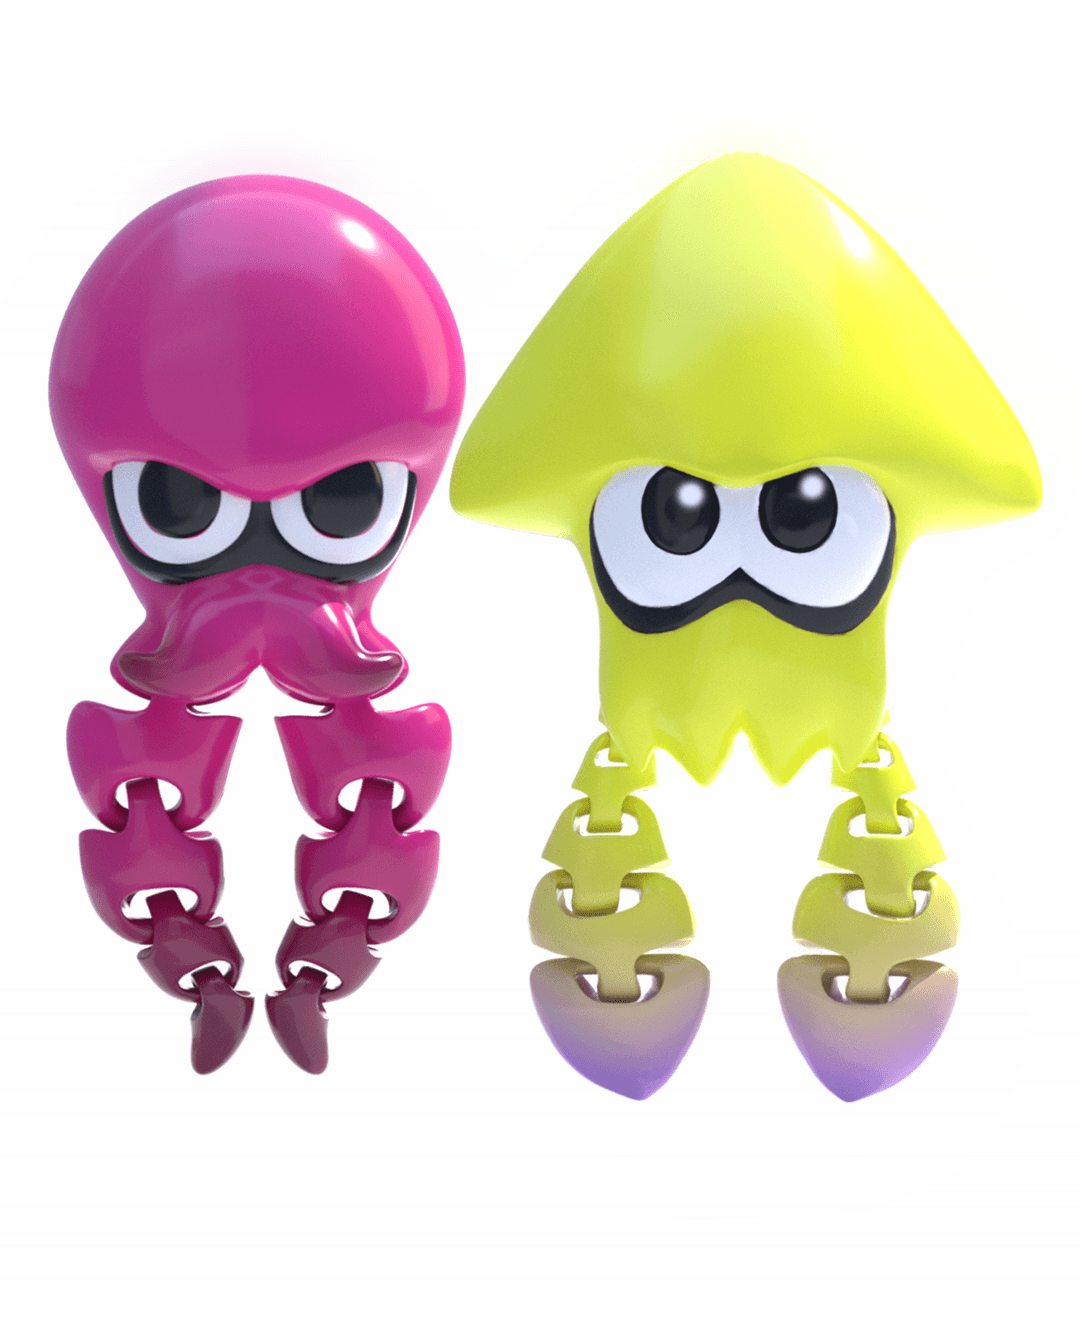 ARTICULATED OCTOLING AND SQUIDLING 3d model